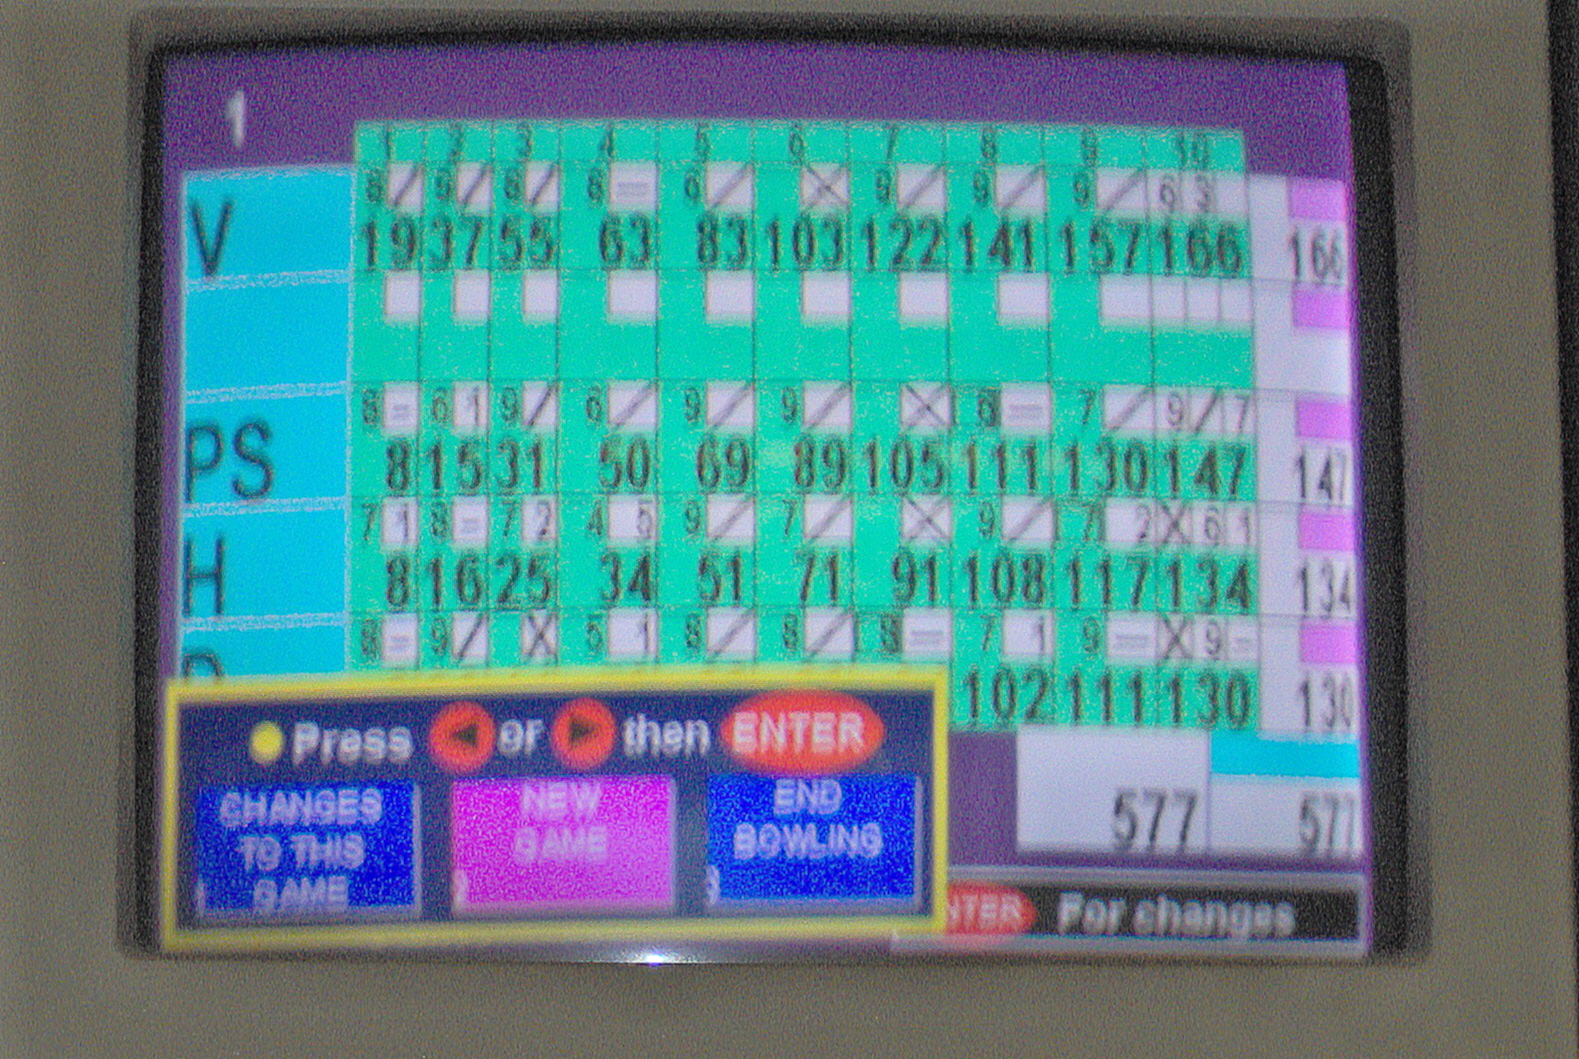 [070216+Bowling+-+Scores+from+Game3.jpg]